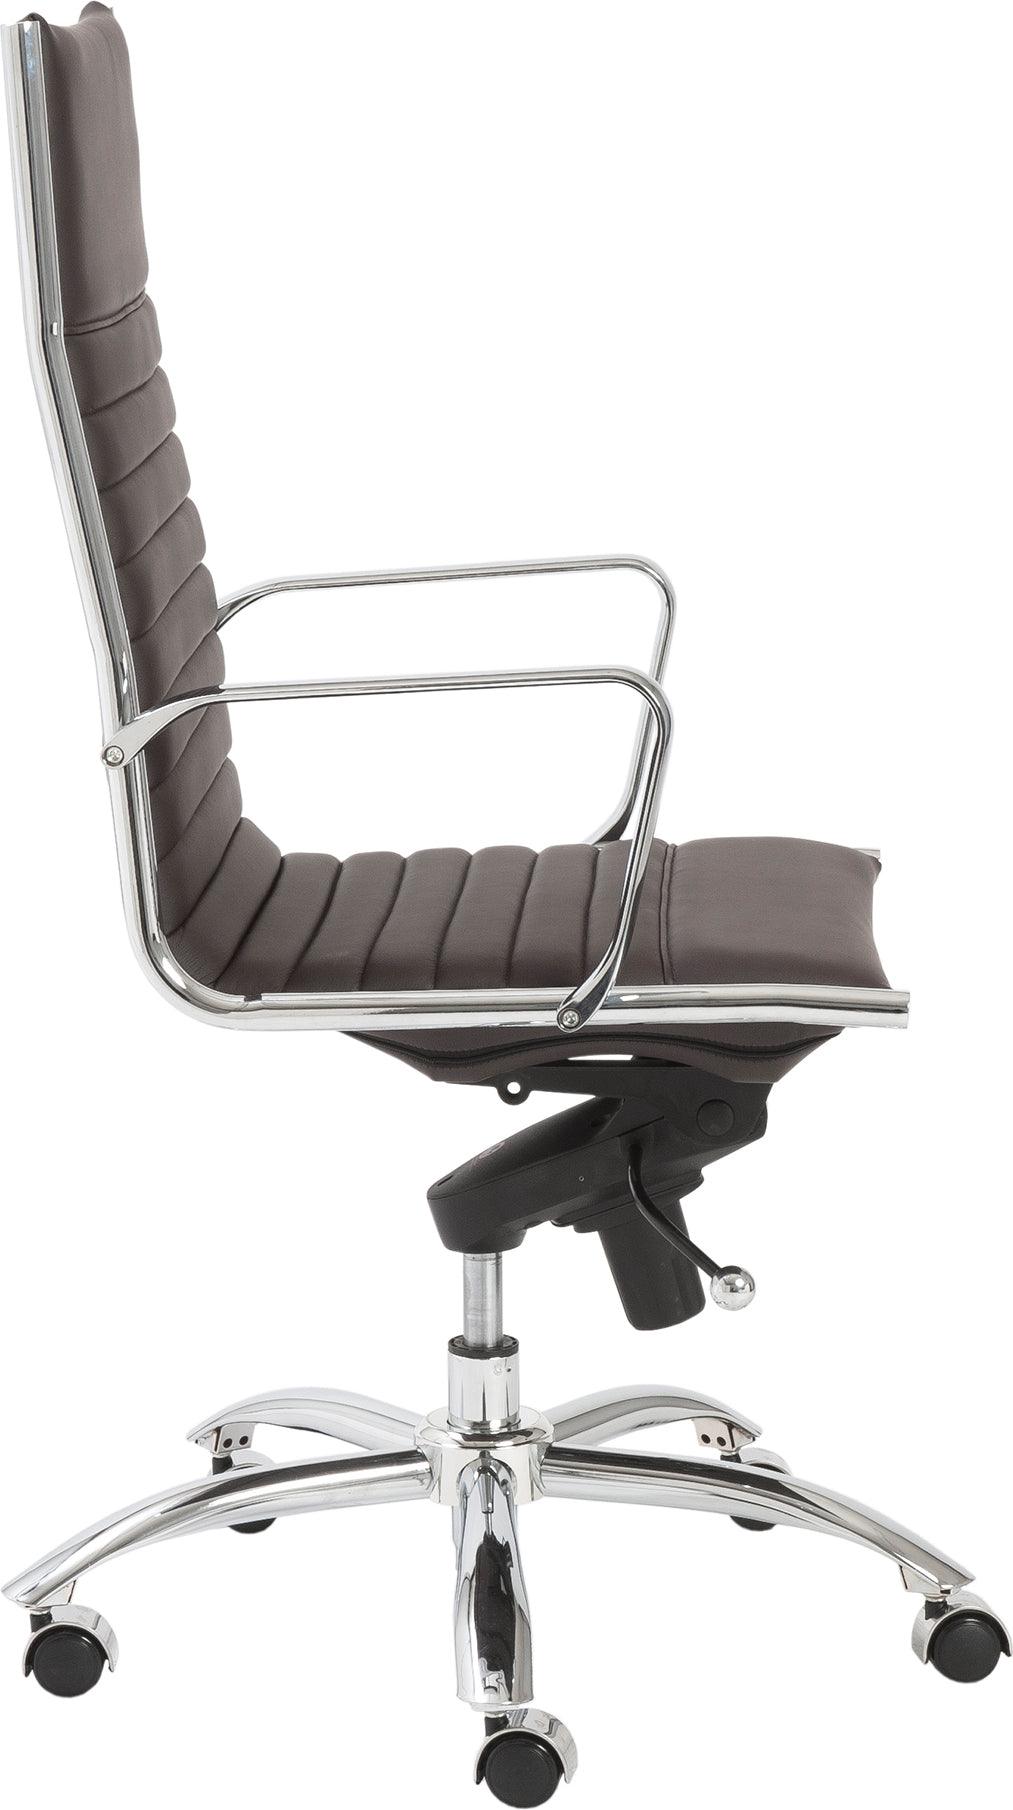 Euro Style Task Chairs - Dirk High Back Office Chair Brown